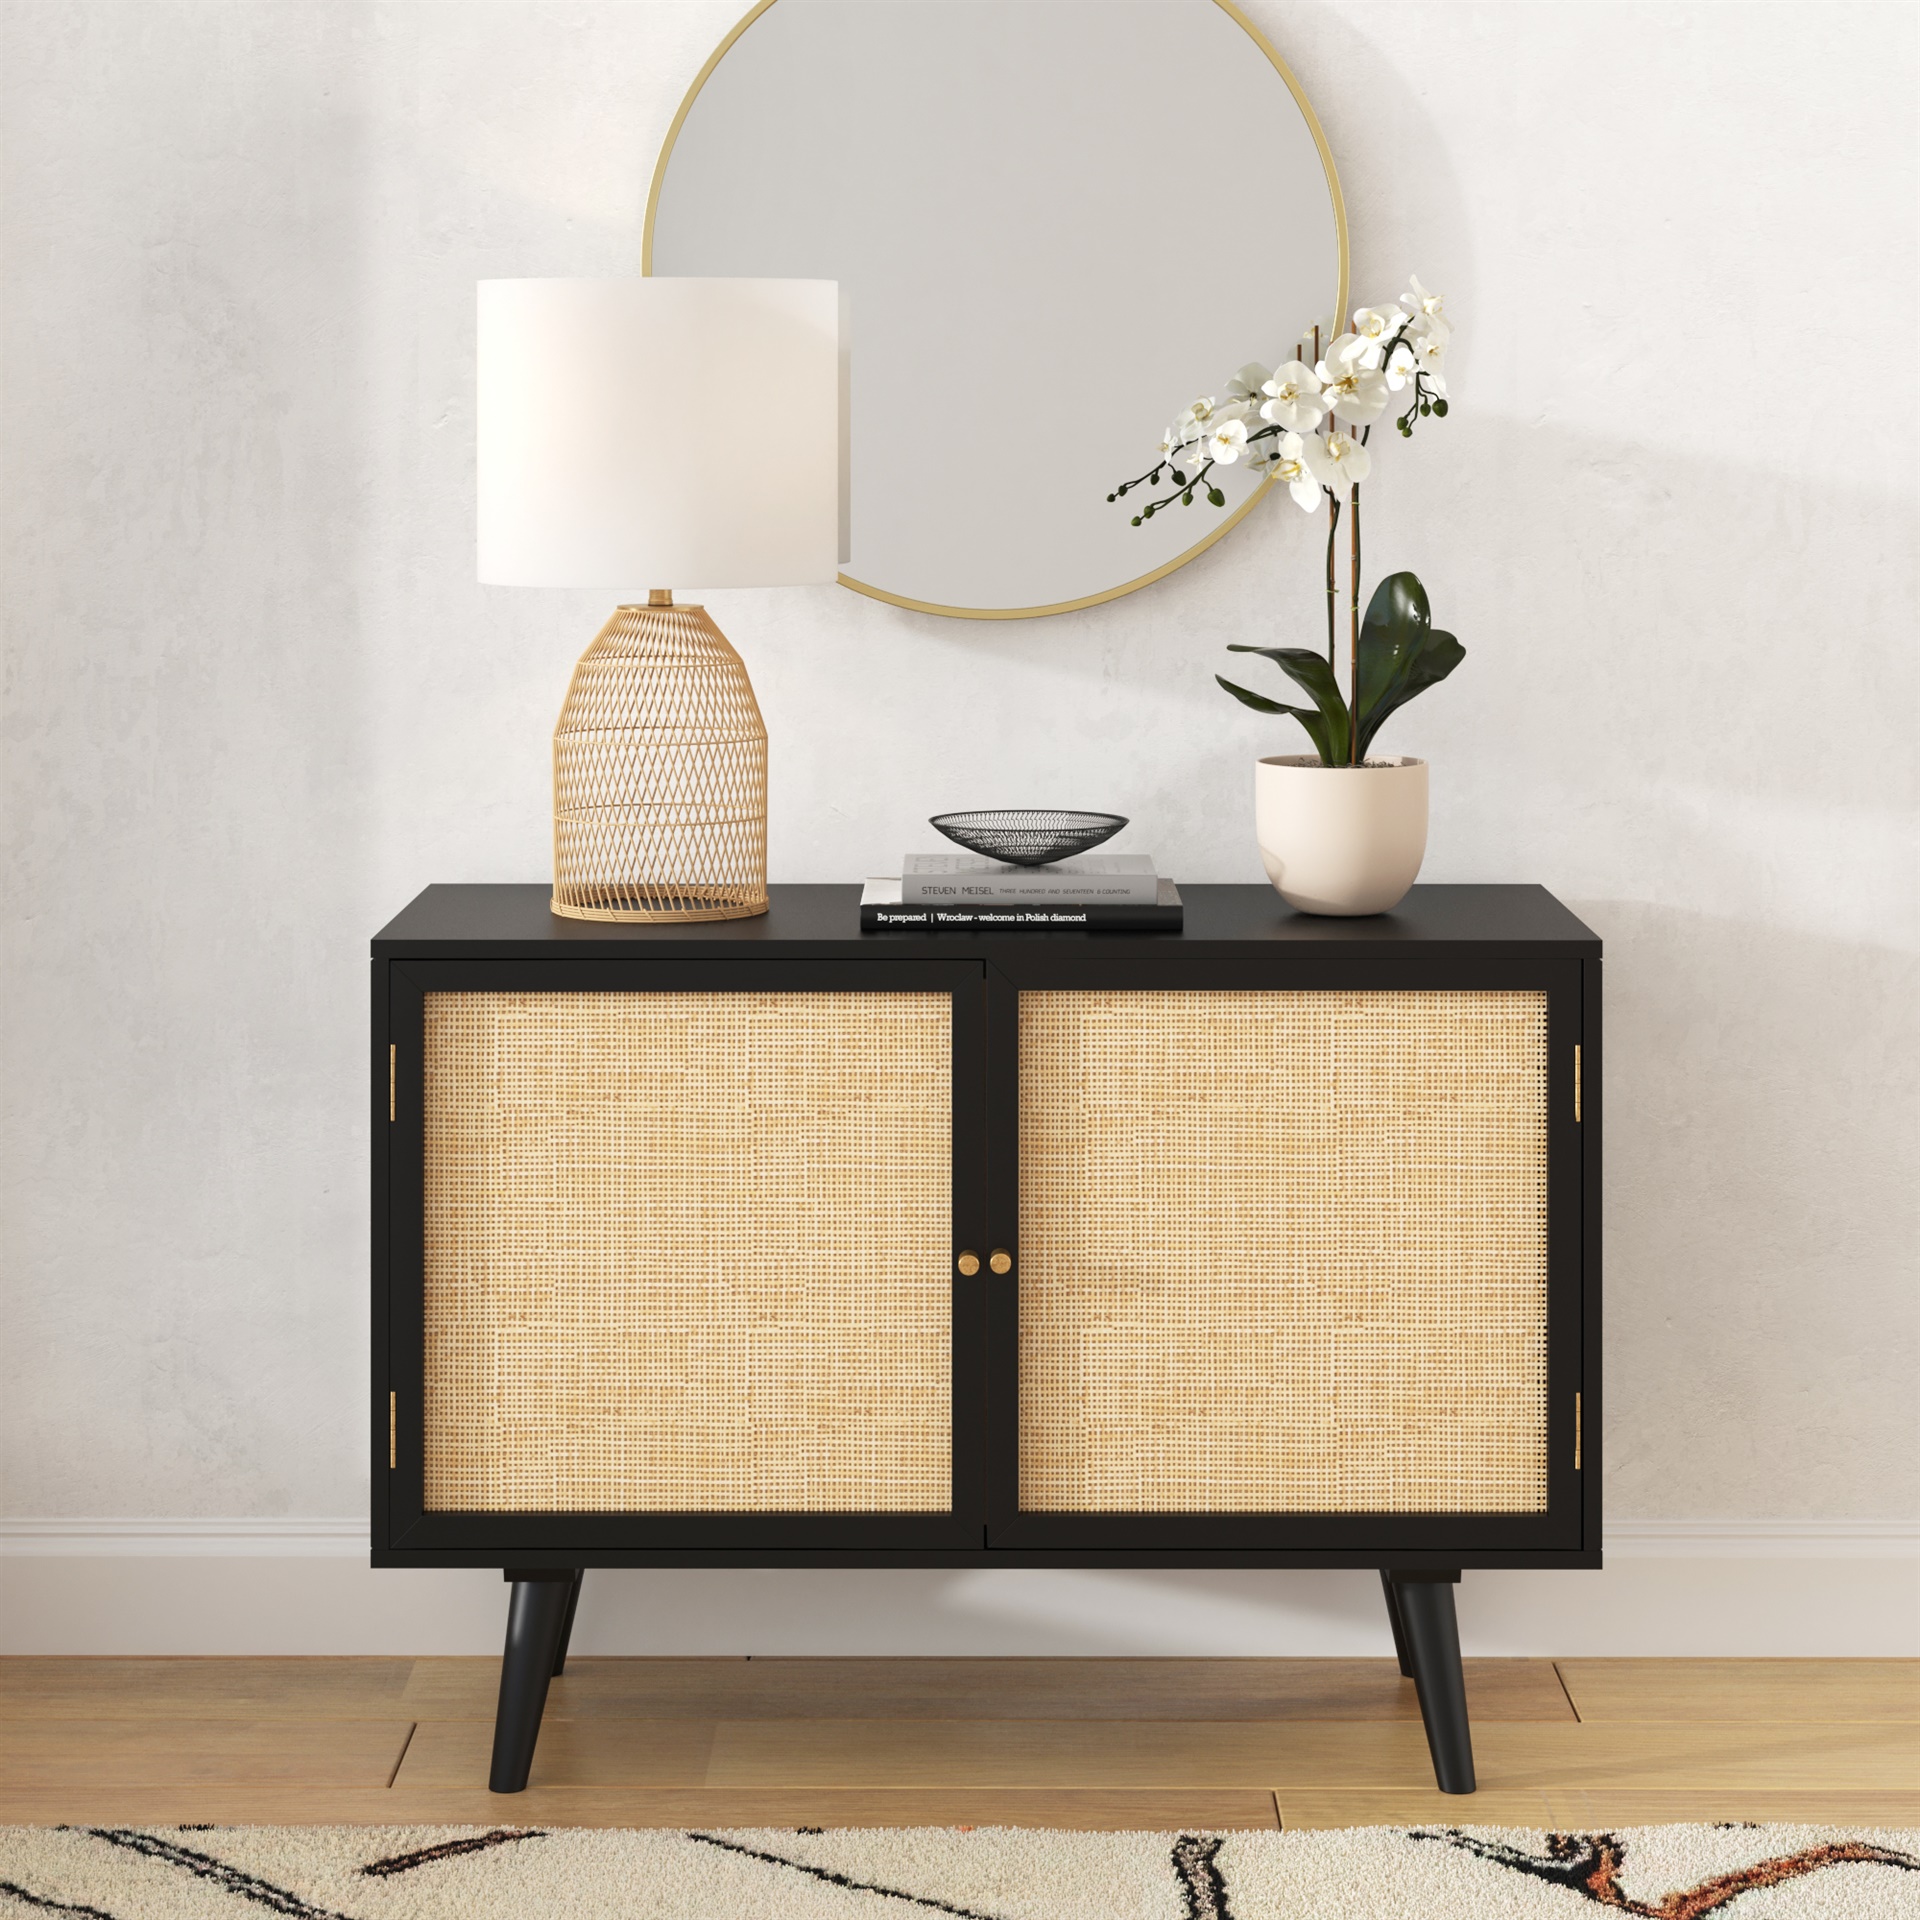 natural cane rattan plant and real mango wood sideboard with vintage peg handles and splayed legs from modern furniture store inmod - padstyle.com